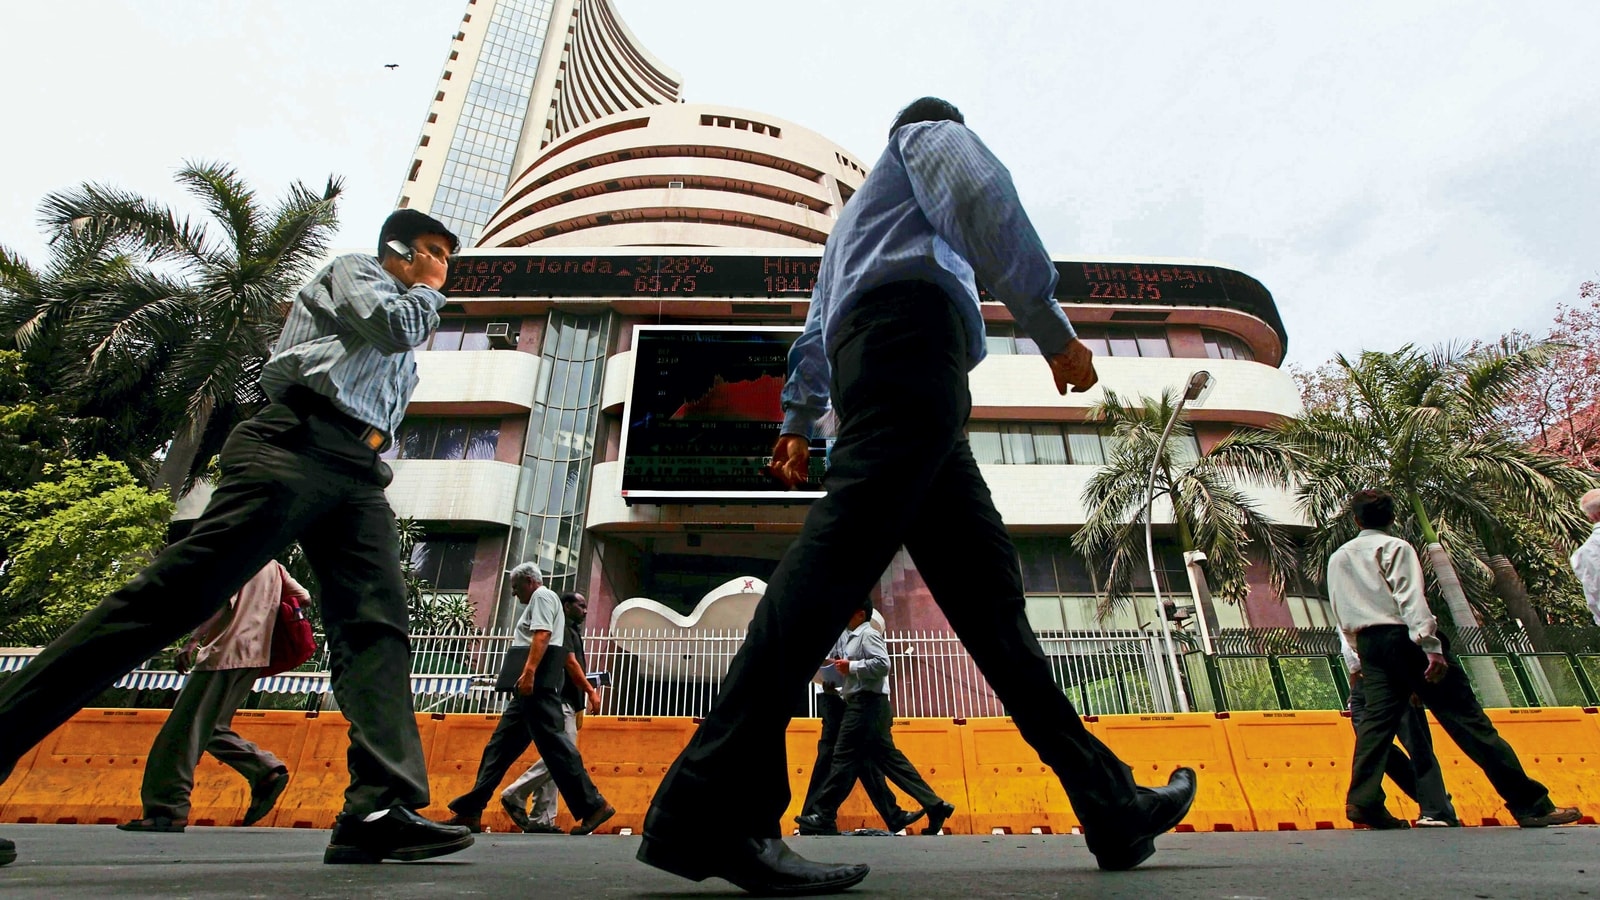 Sensex tanks 778 points to close at 55,468, Nifty ends session at 16,628